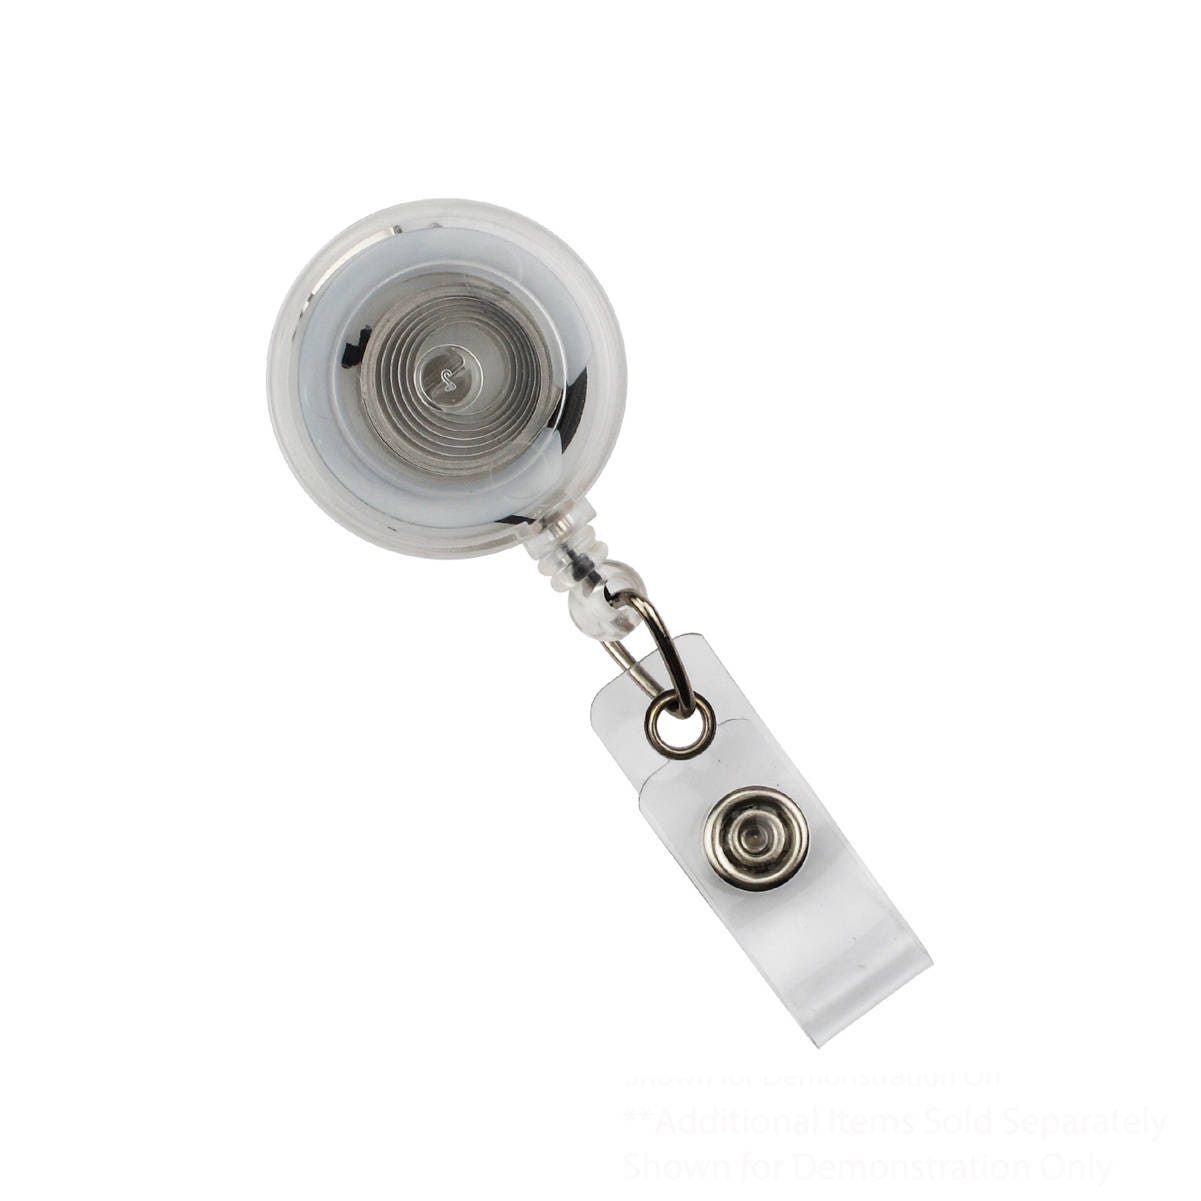 10 Clear Badge Reels Free Shipping SWIVEL Pinch Clip 360 Alligator  Retractable ID Holders Bulk Crafting Supplies 2120-7621-Q10 